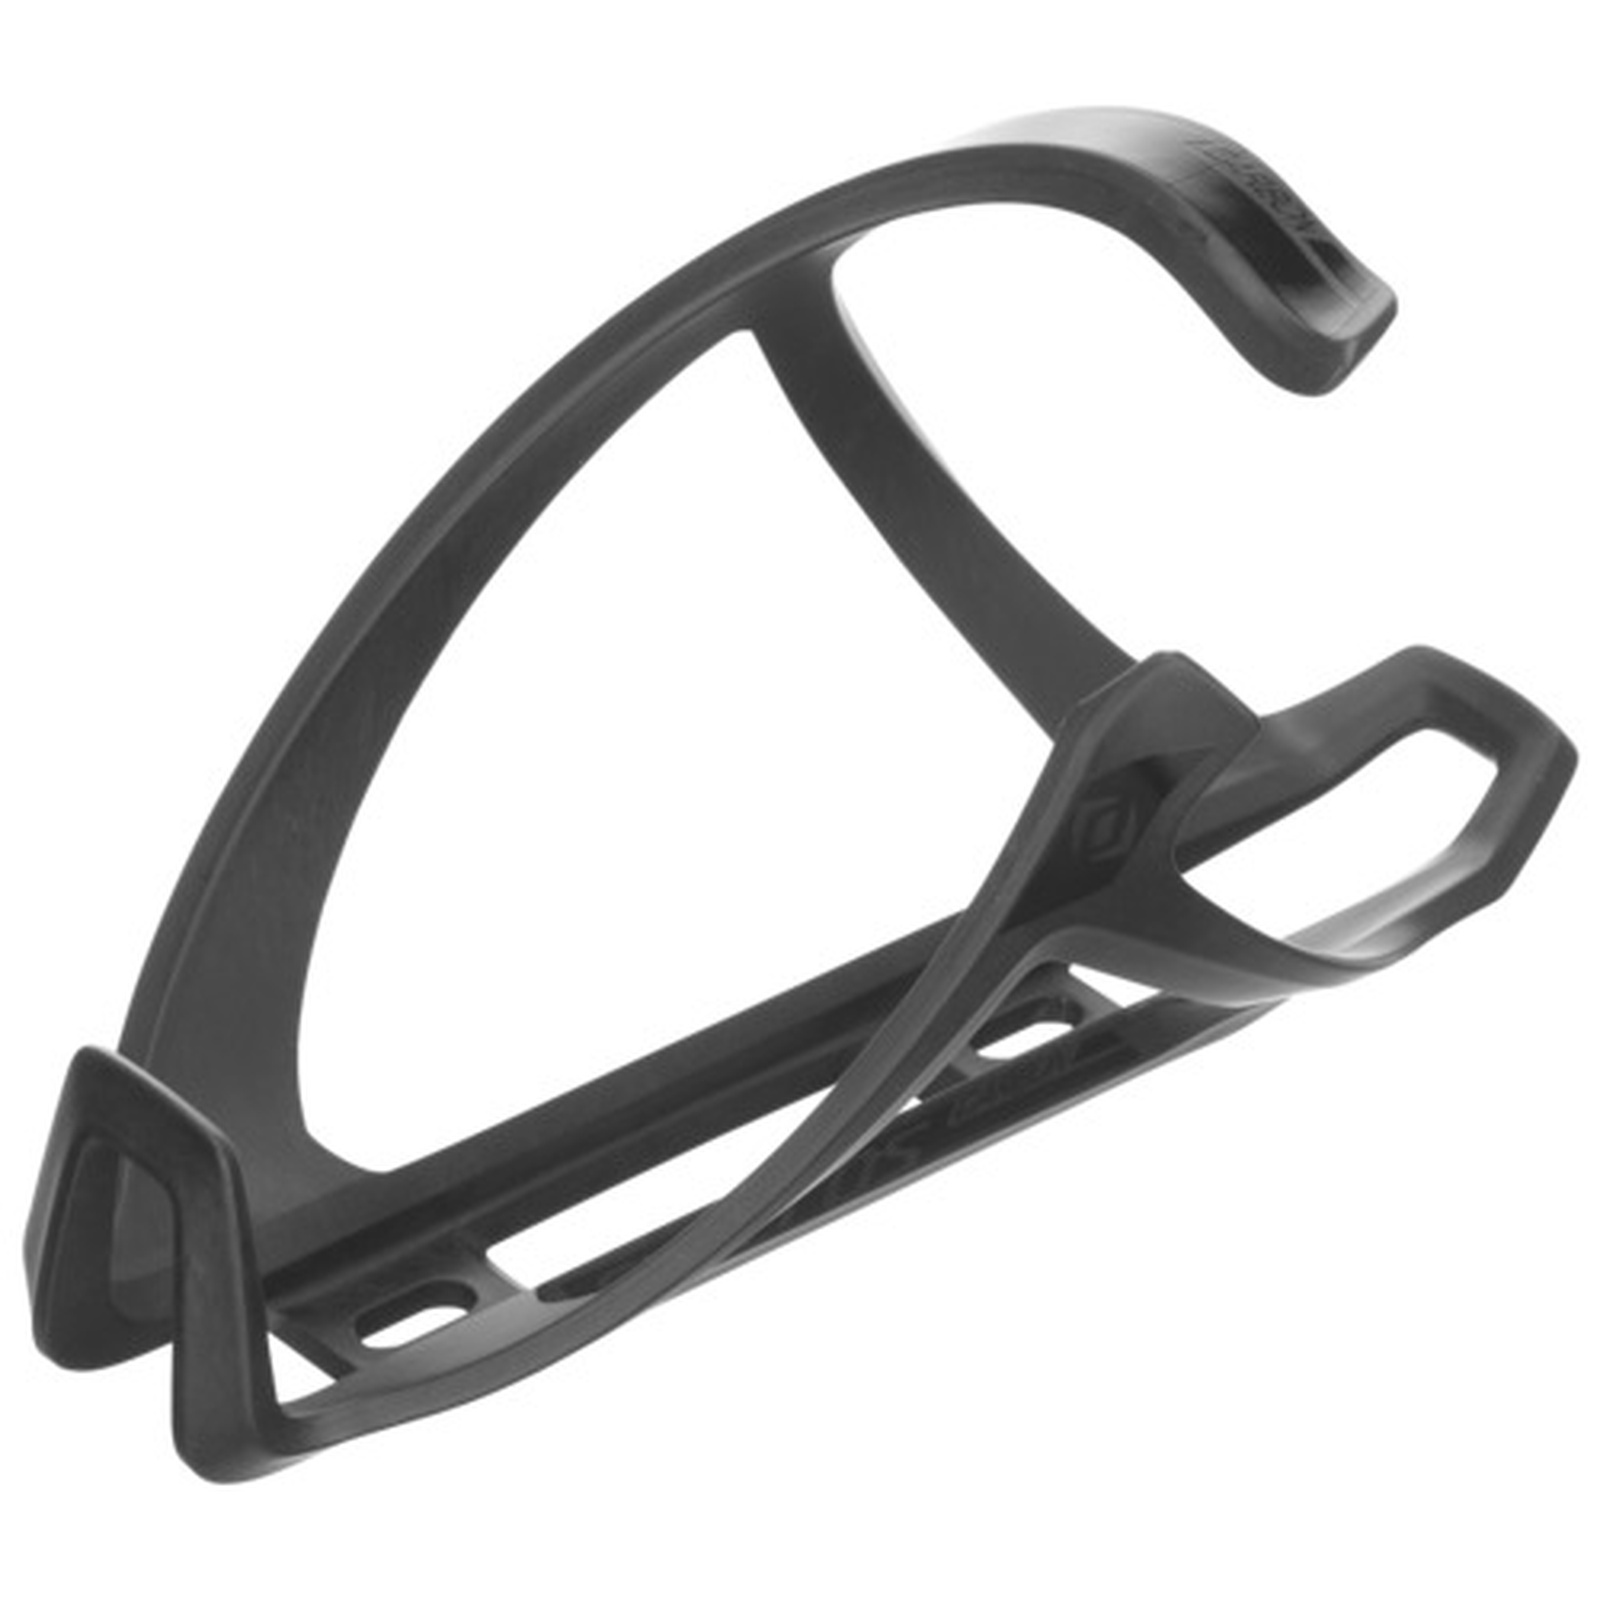 SYN Bottle Cage Tailor cage 1.0 Right